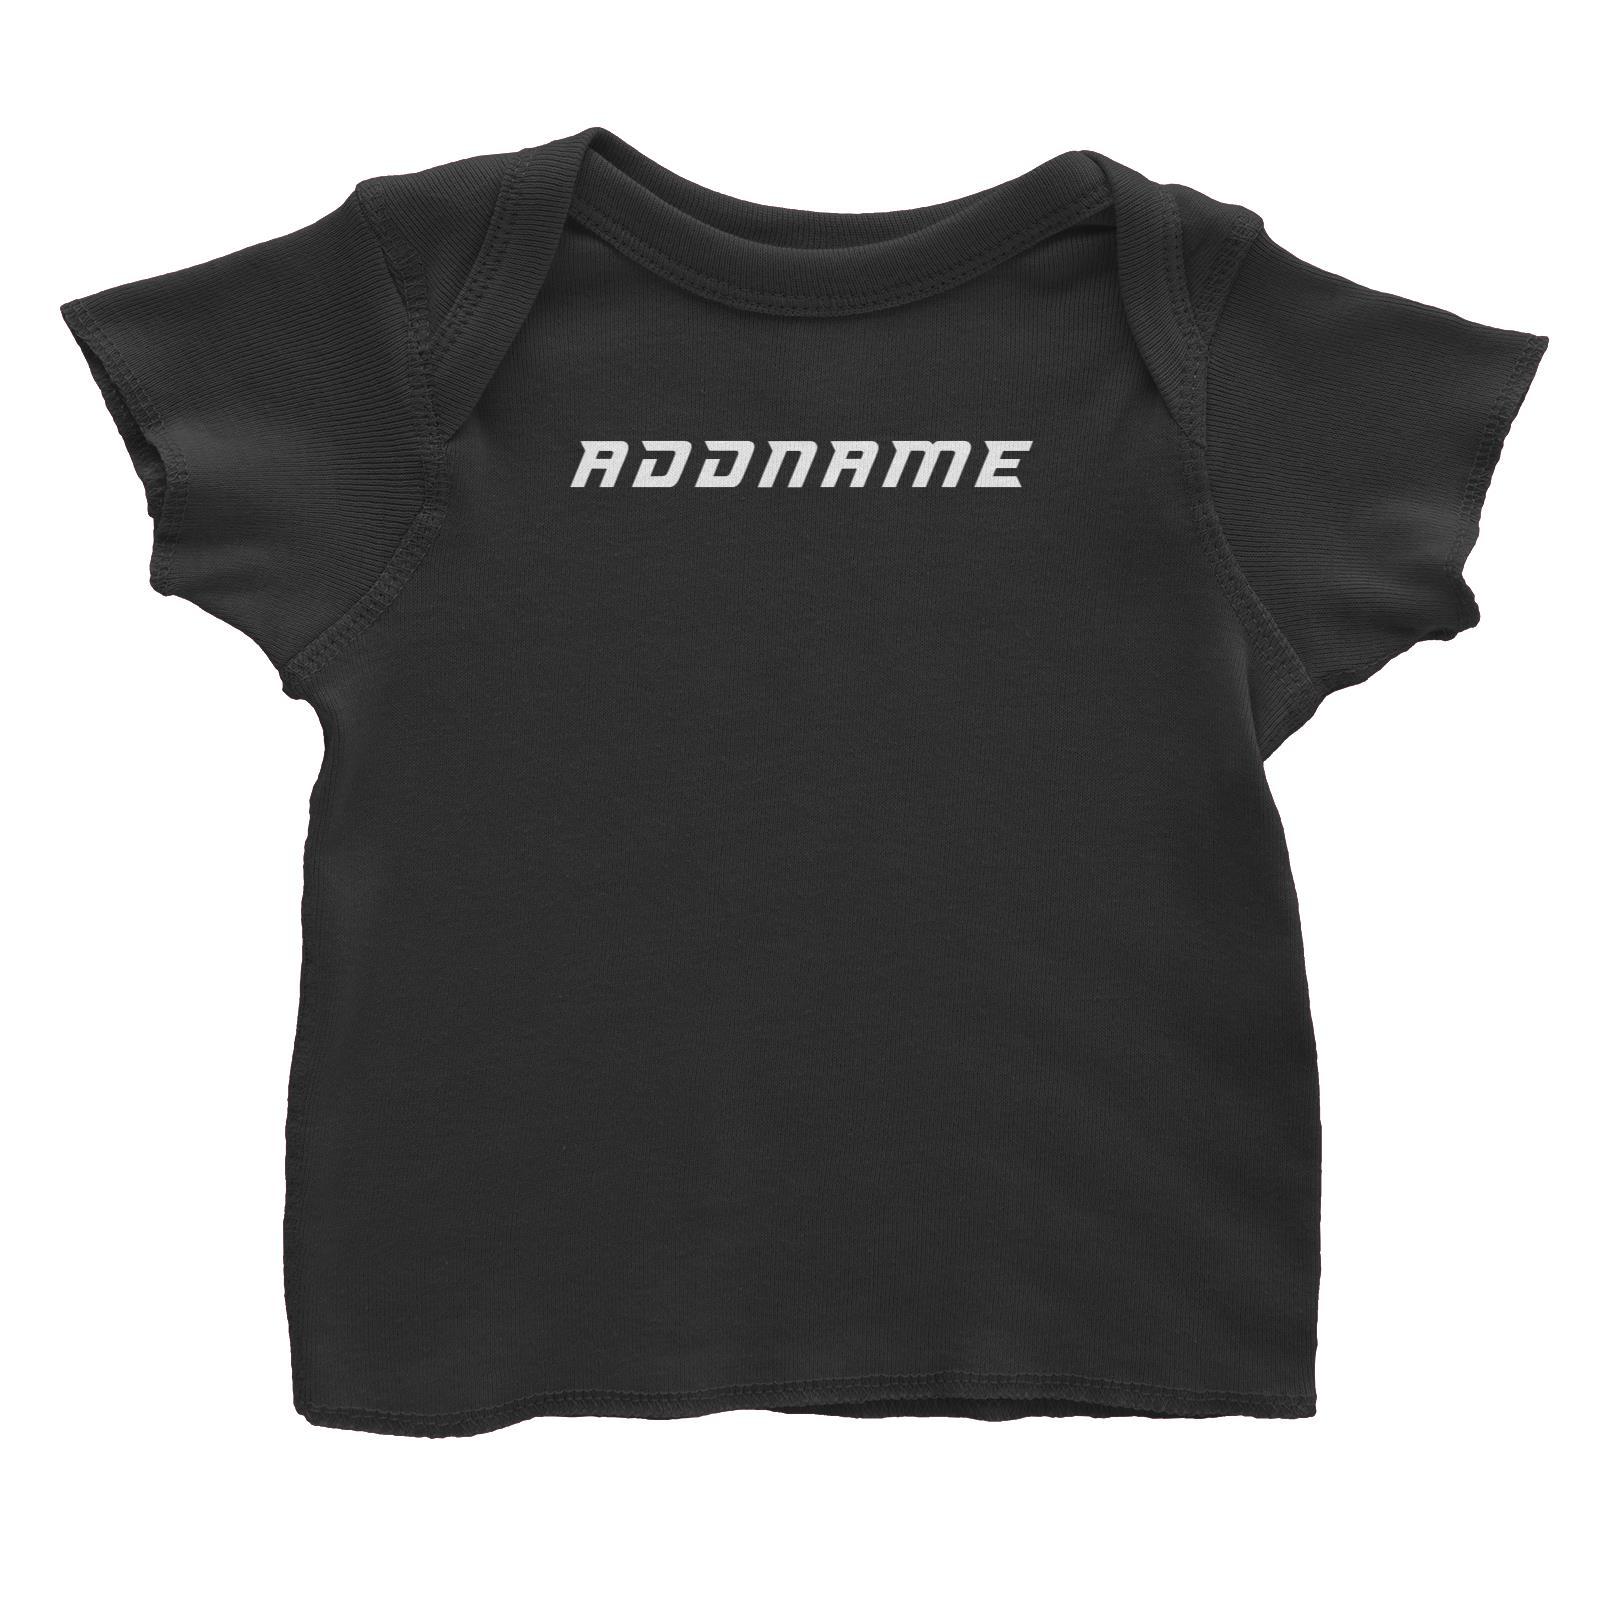 Modern Sporty Family Addname Baby T-Shirt